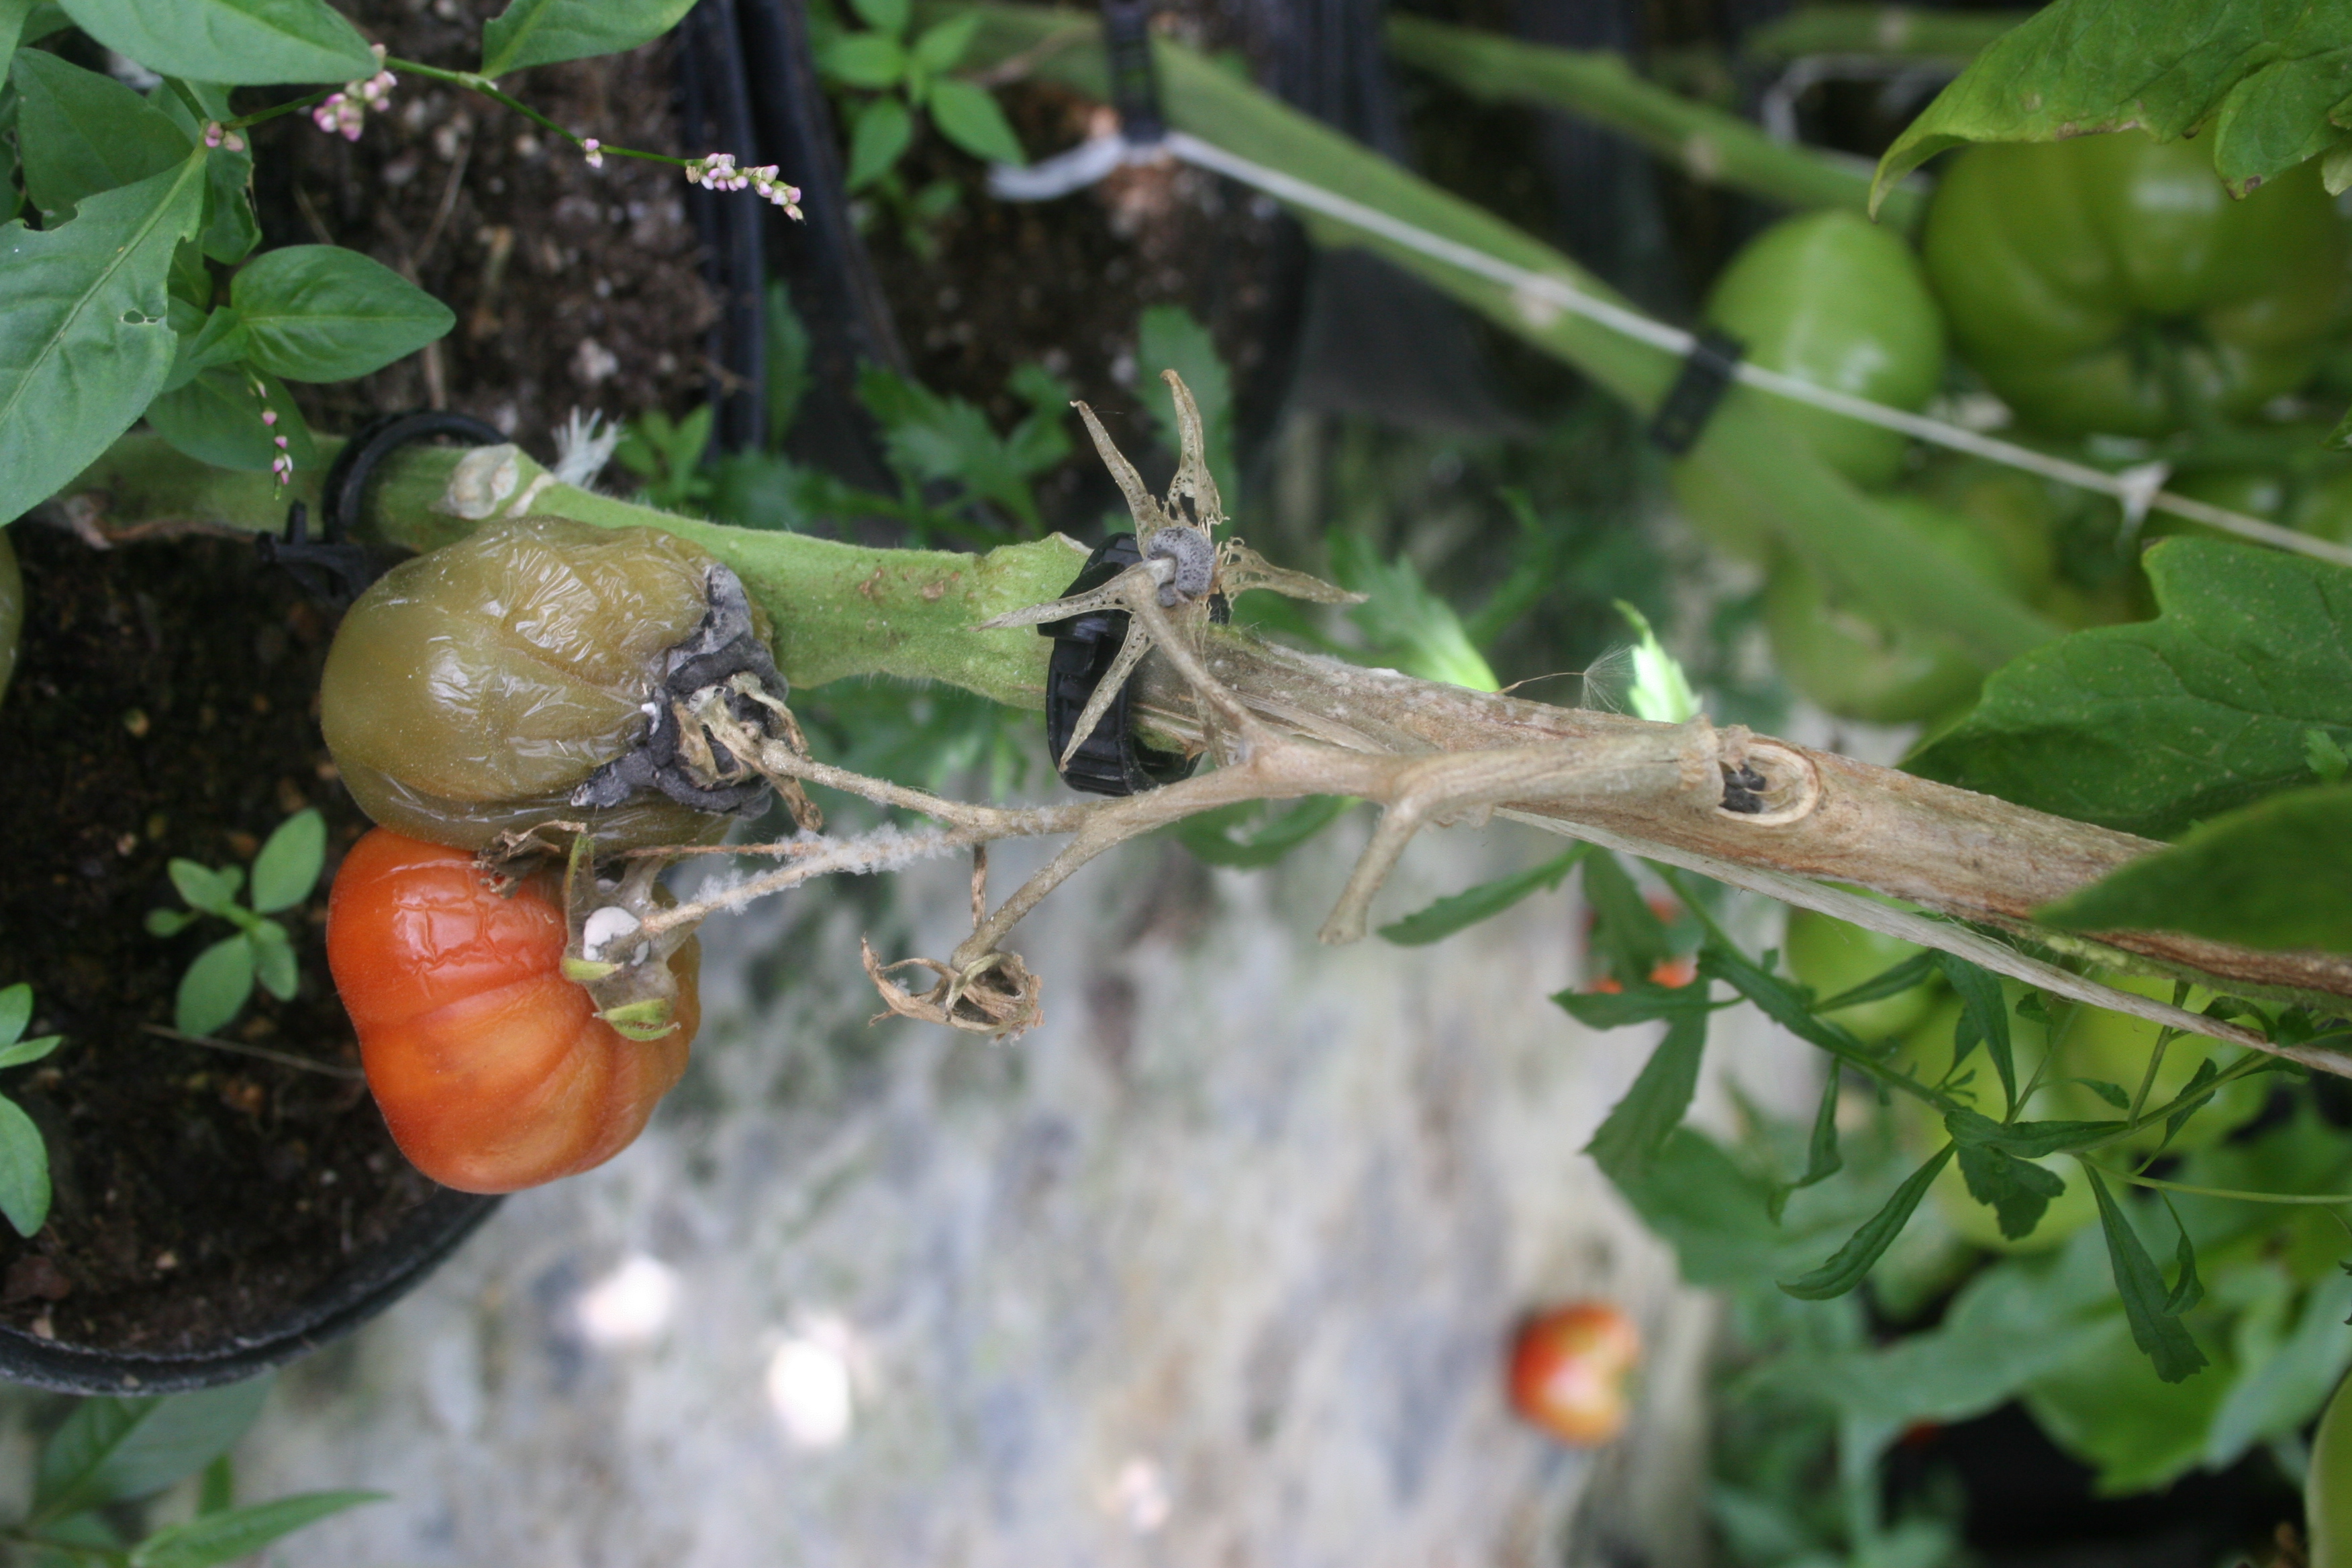 Sclerotinia white mold/timber rot resulting in fruit drop on tomato.